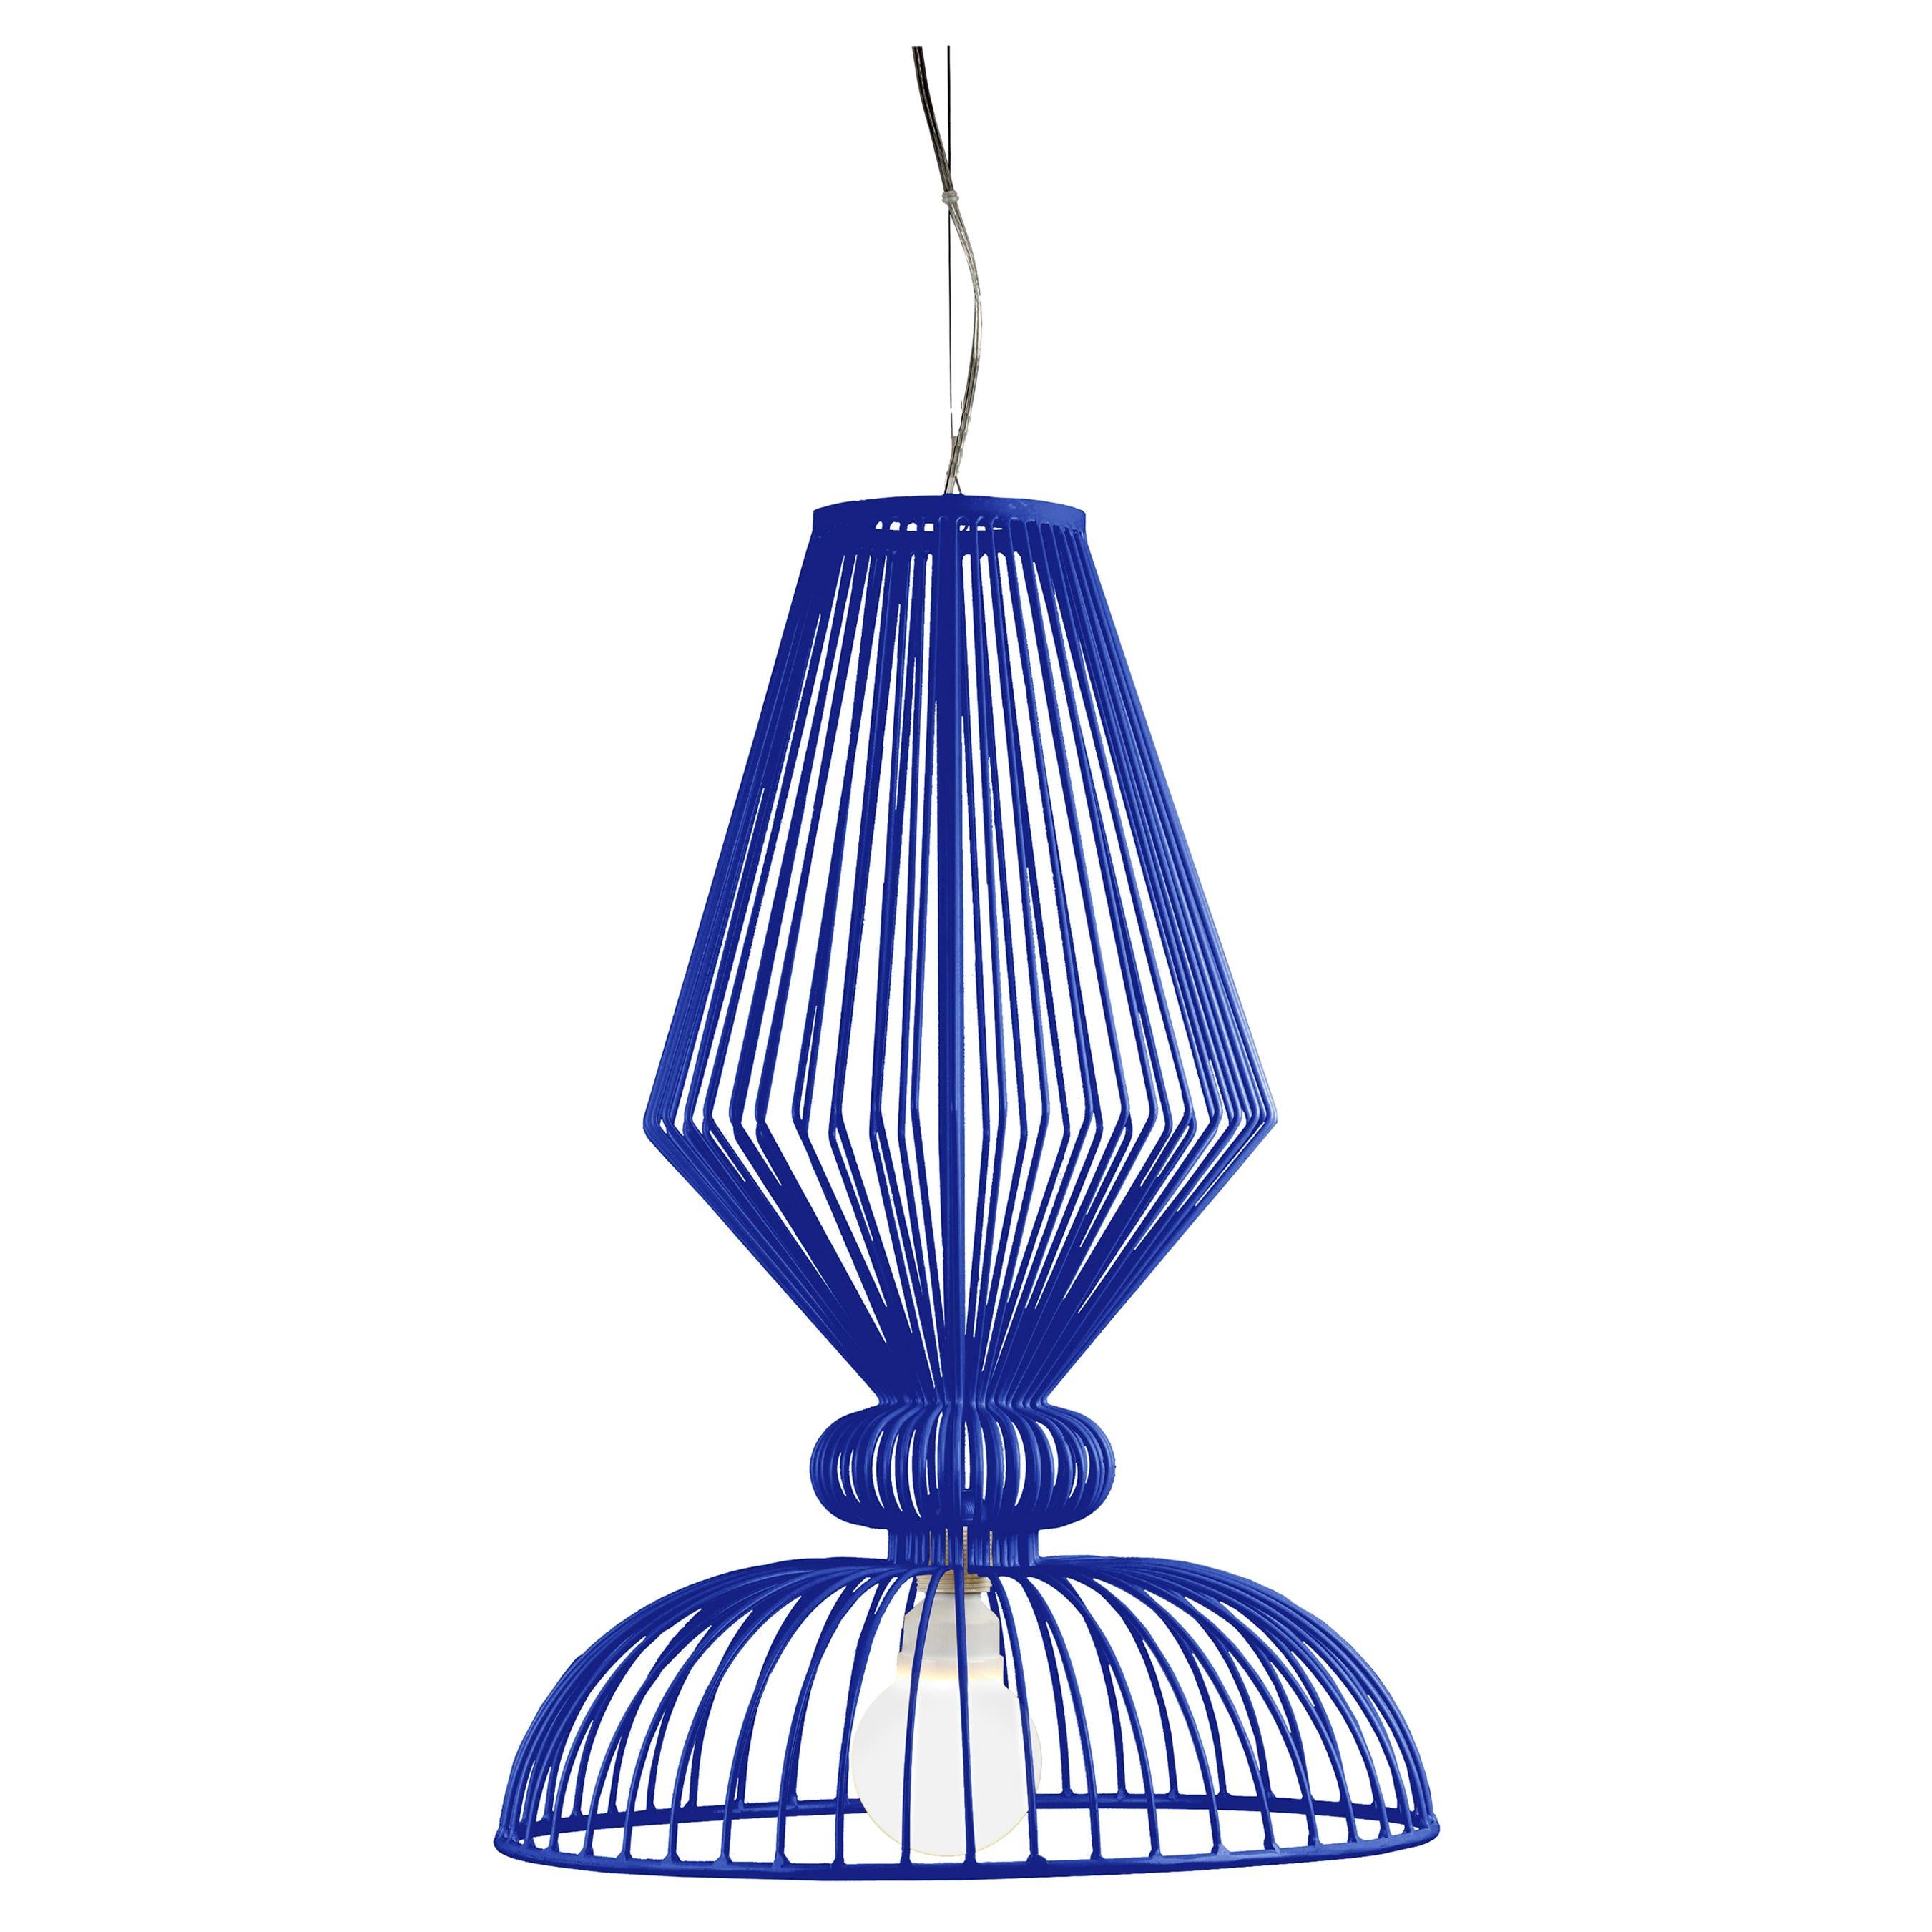 Contemporary Industrial Inspired Expand Pendant Lamp Cobalt Blue